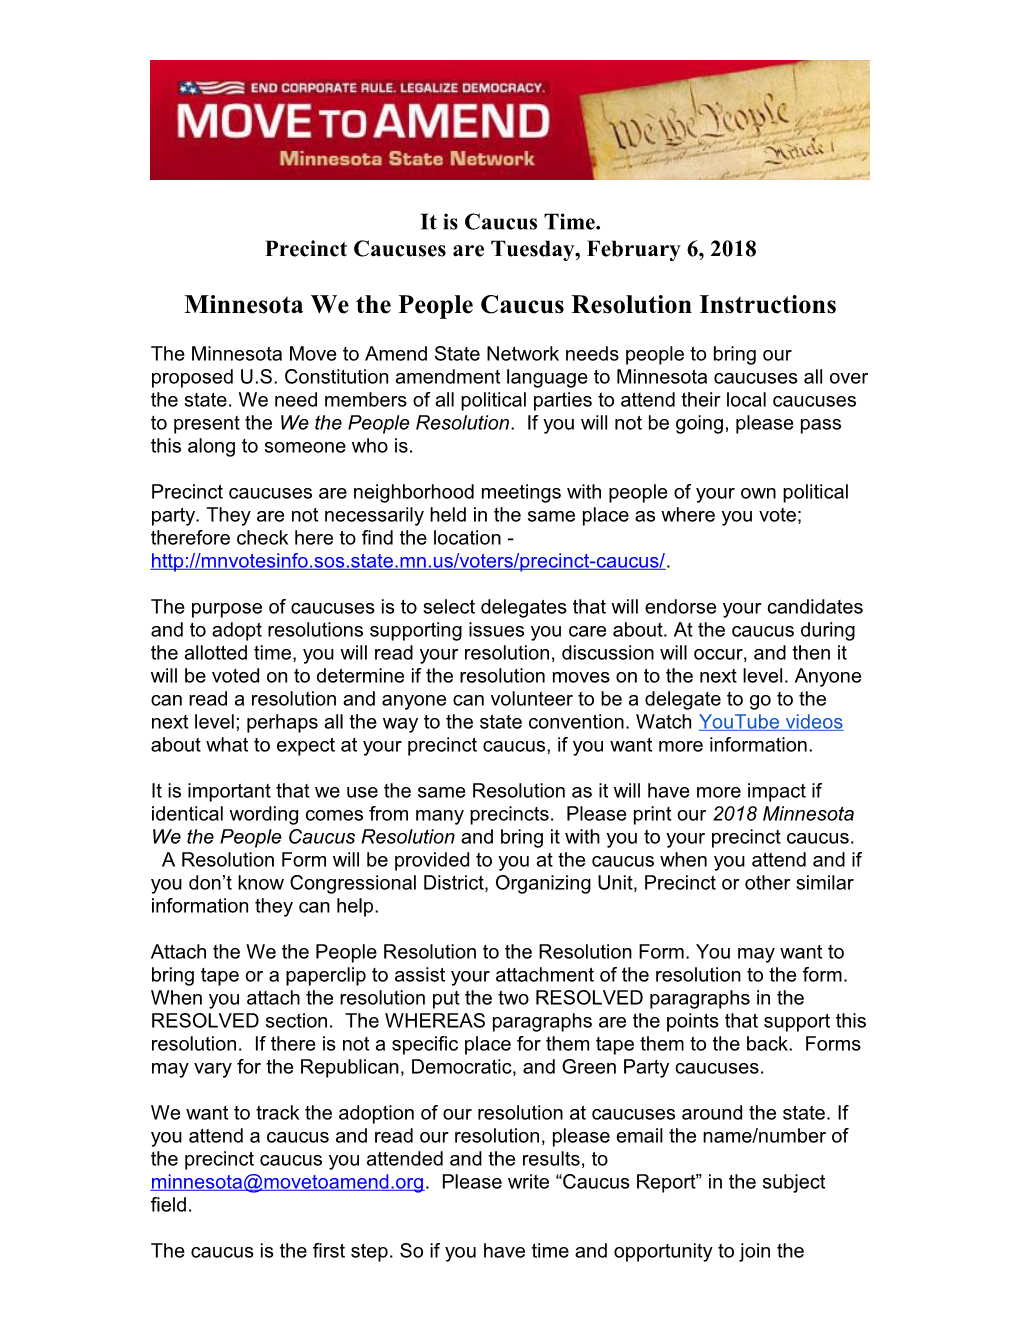 Minnesota We the People Caucus Resolution Instructions